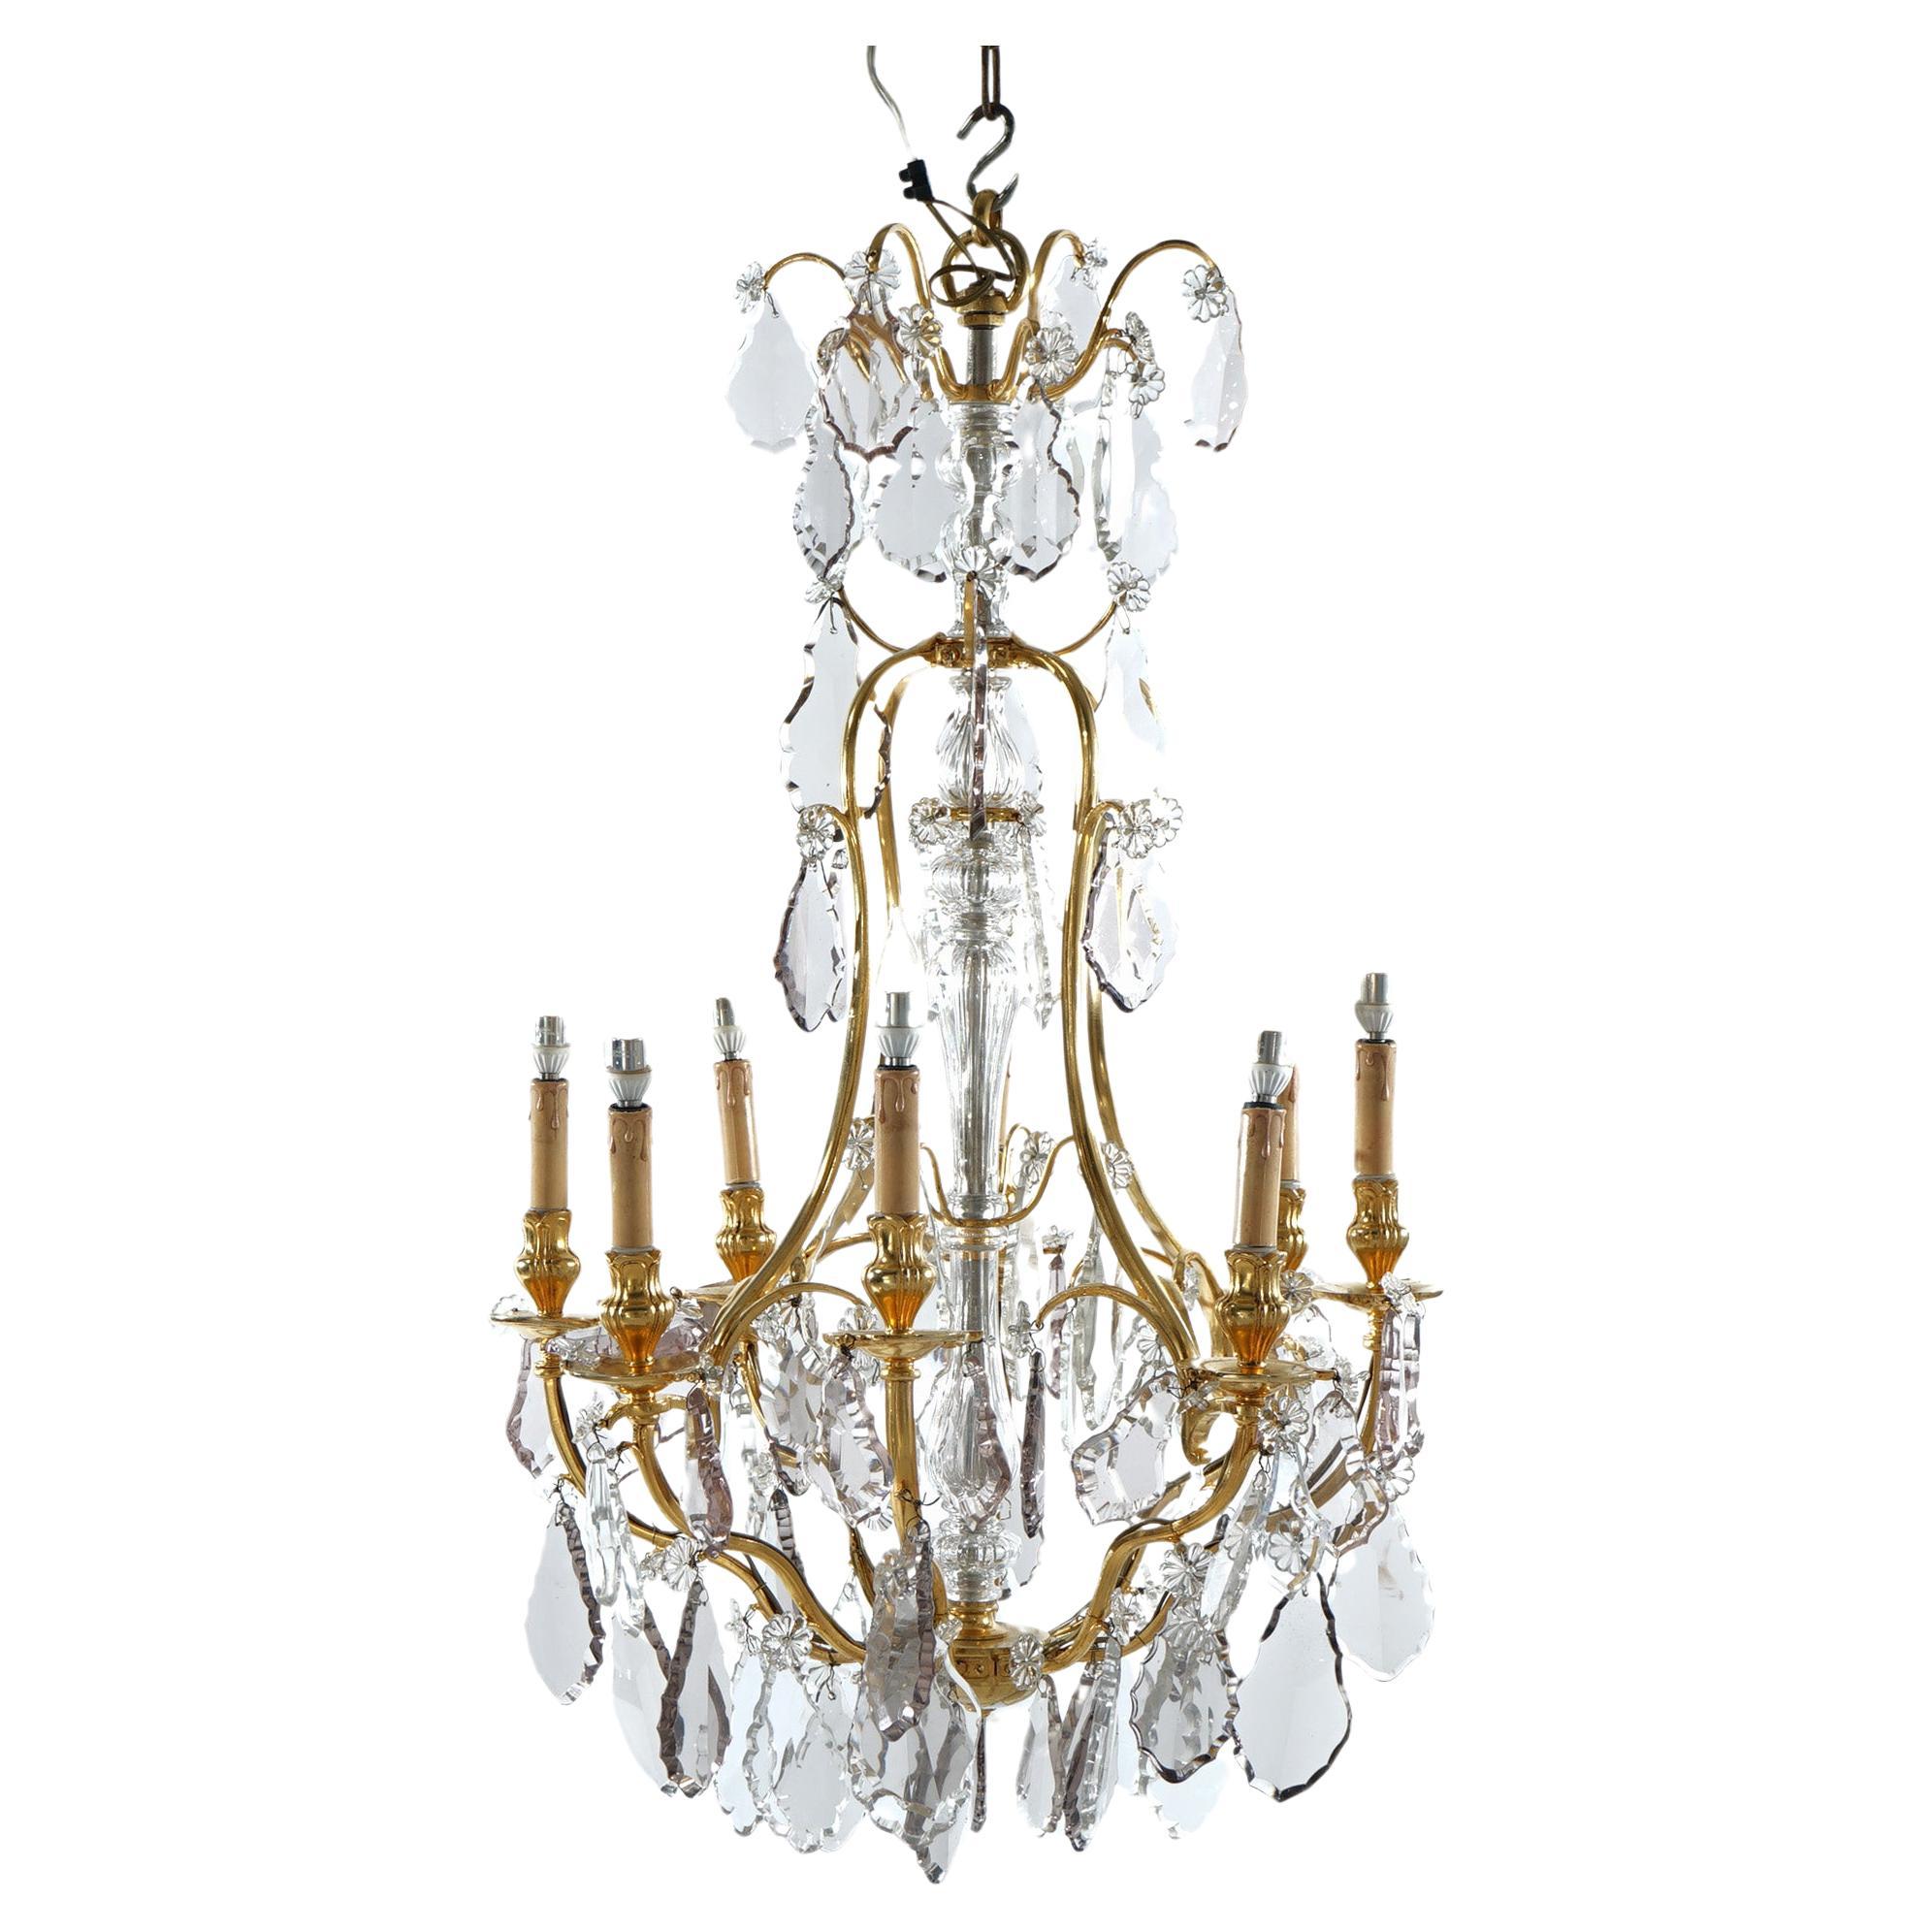 French Louis XIV Style Gilt Bronze & Chrystal 8-Light Chandelier 20th C